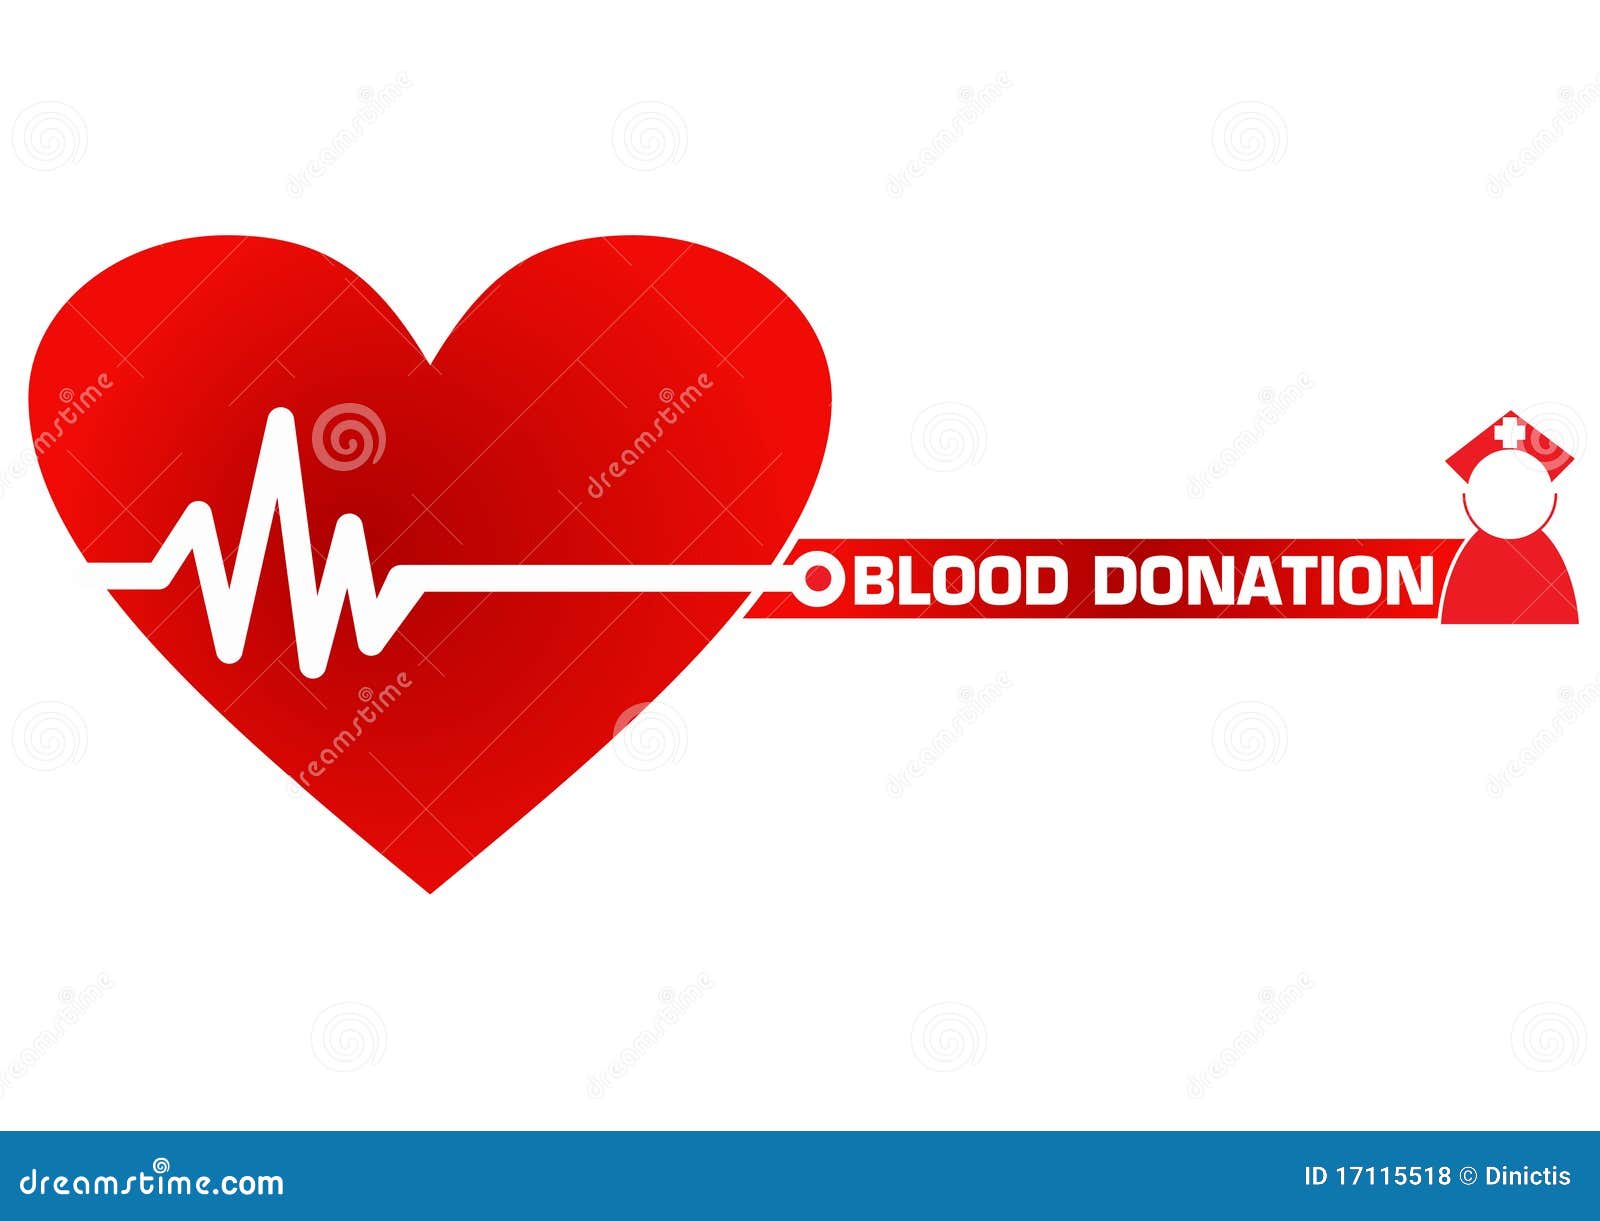 clipart blood donation - photo #40